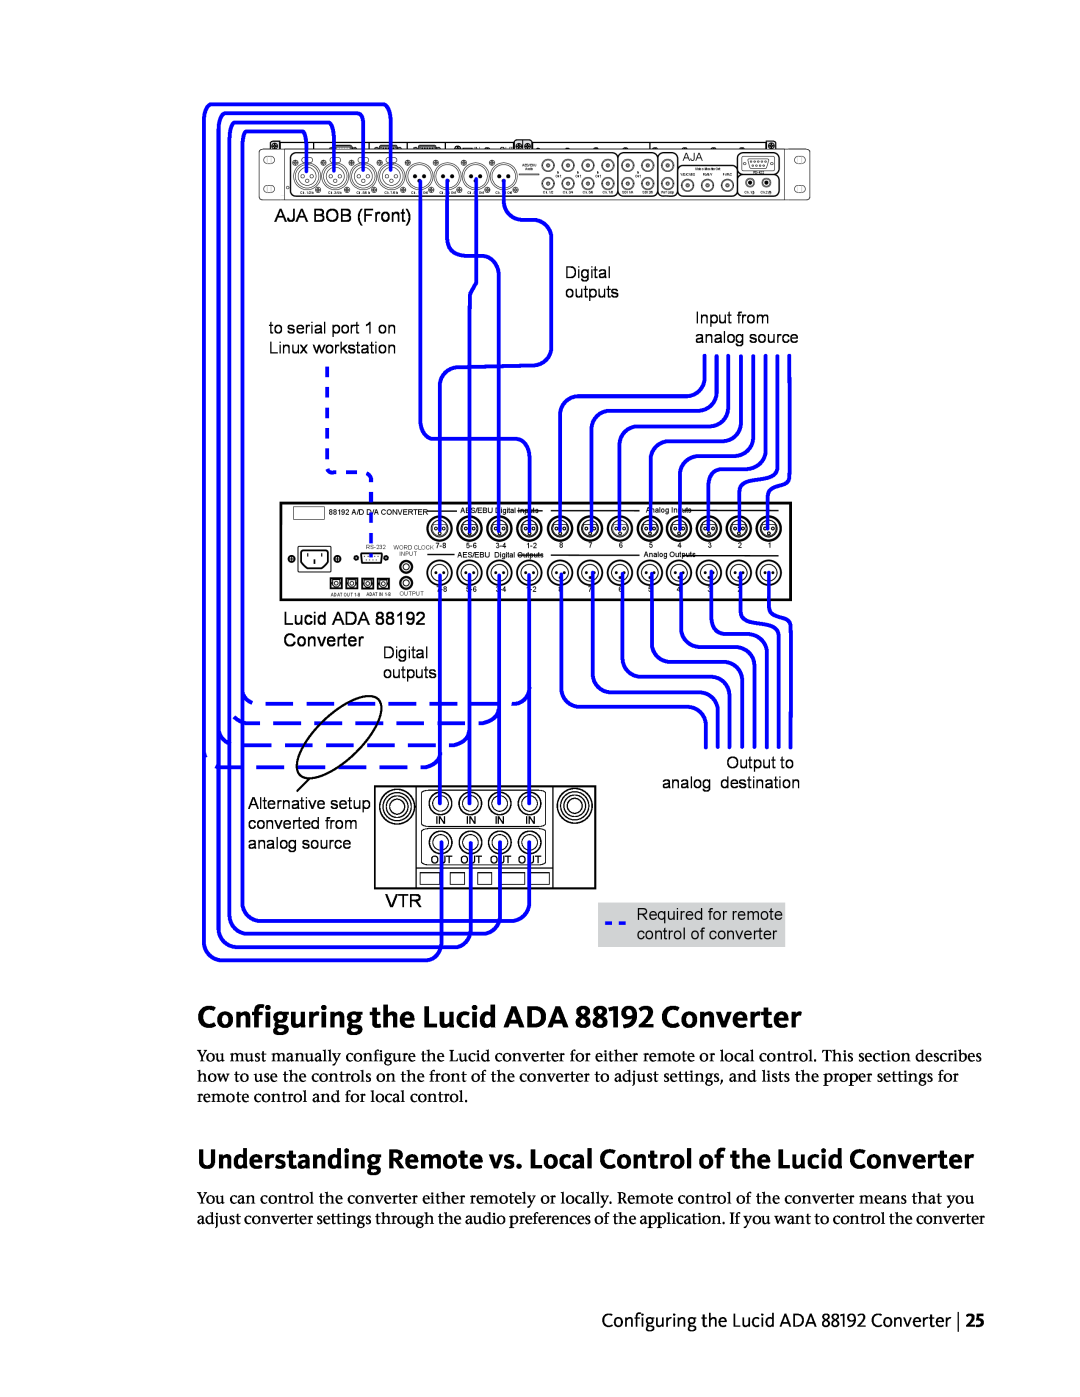 HP Z800 manual Configuring the Lucid ADA 88192 Converter, Understanding Remote vs. Local Control of the Lucid Converter 